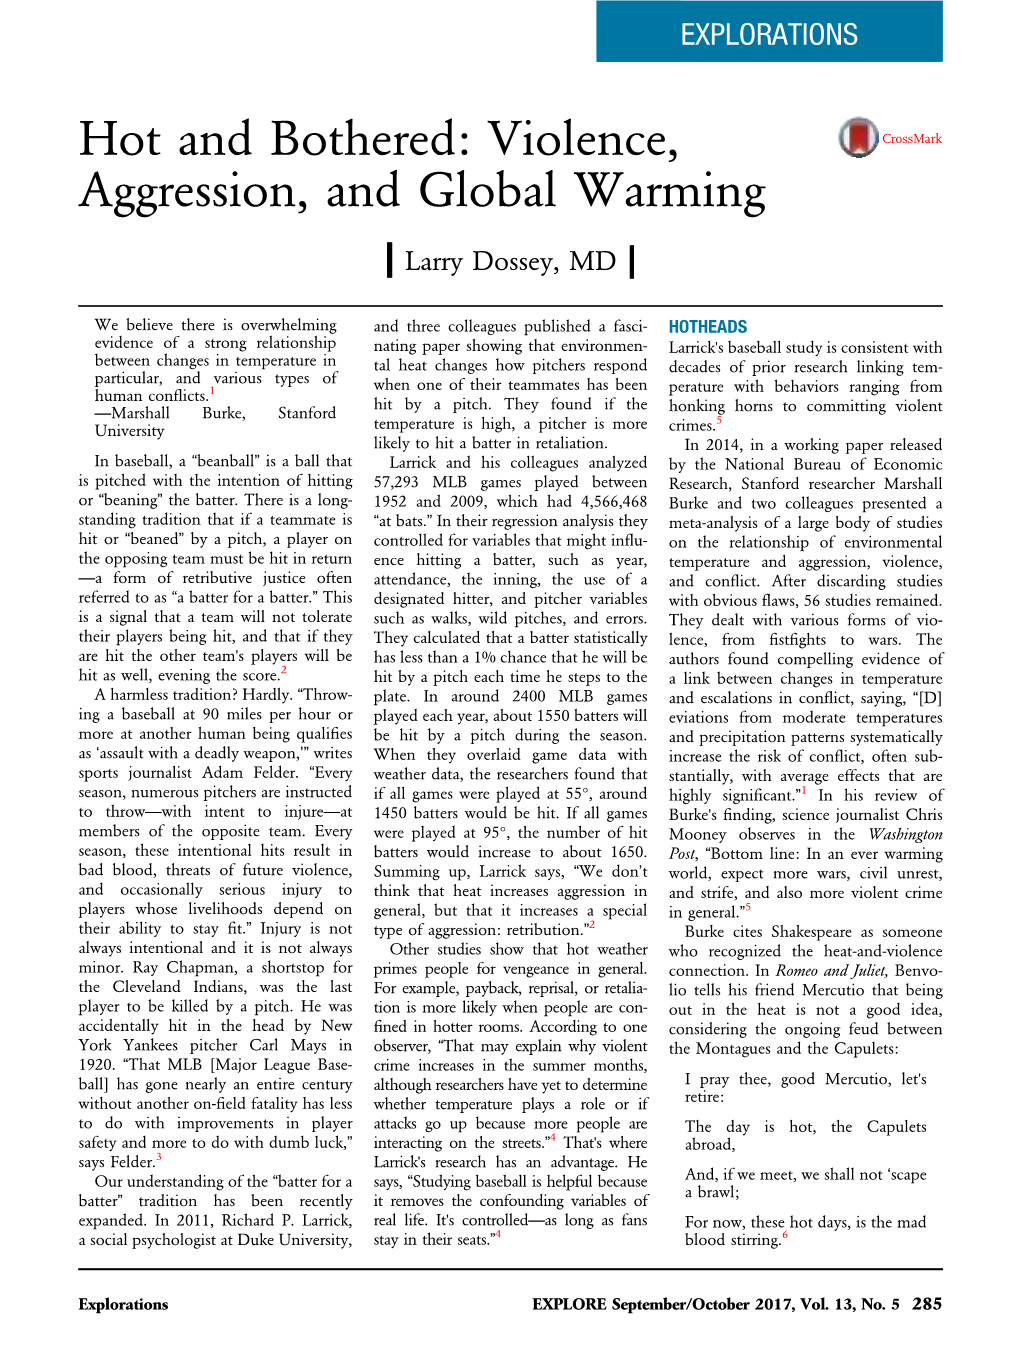 Hot and Bothered Violence, Aggression, and Global Warming